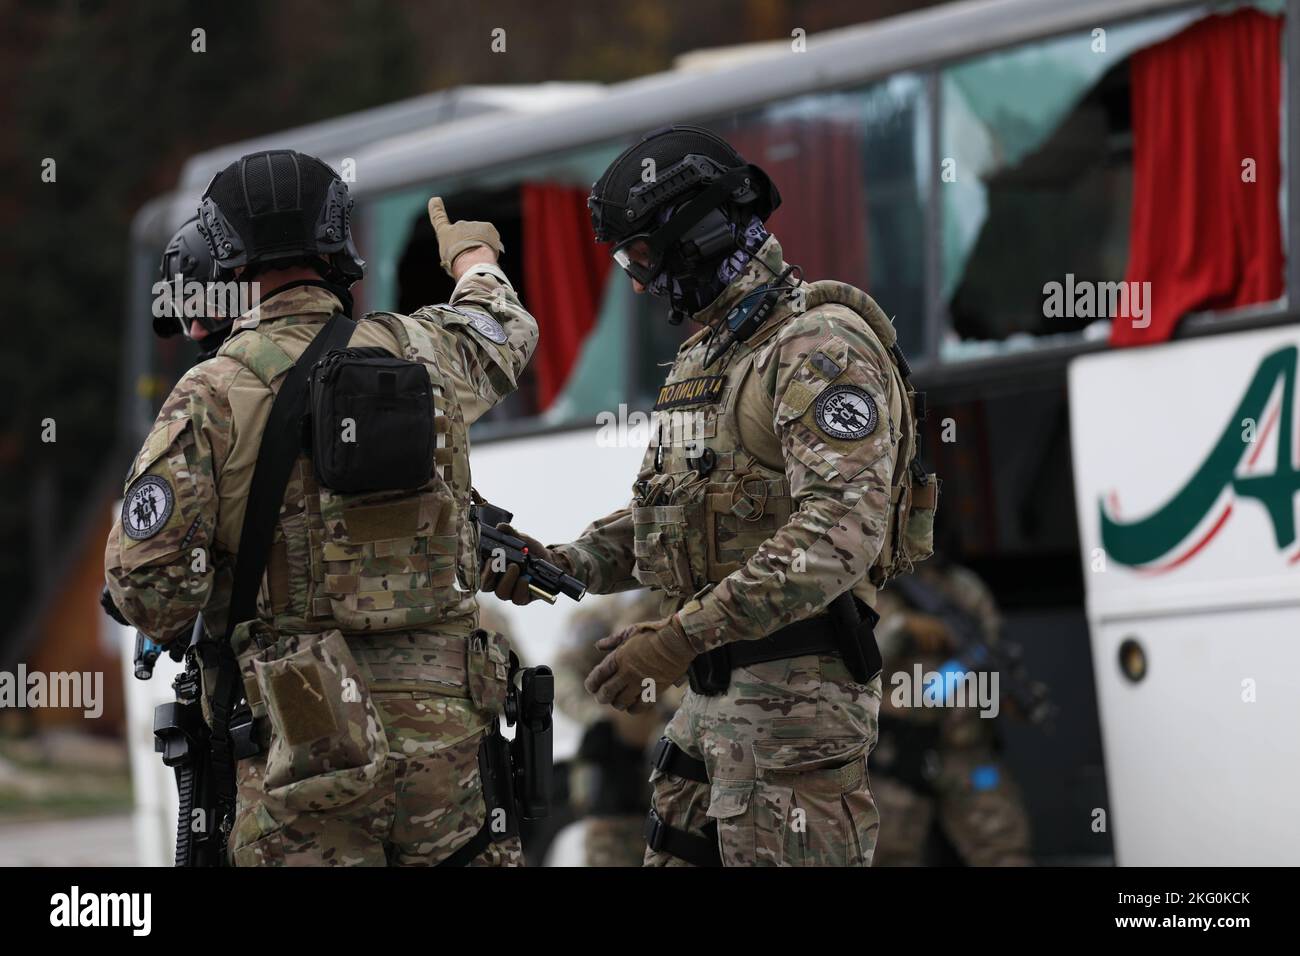 A member of the Special Support Units (SSU) of Bosnia-Herzegovina State Investigation Protection Agency (SIPA) signals the rest of the team before checking the bus storage spaces during a raid as part of exercise Brutalist Tornjak in Sarajevo, Bosnia and Herzegovina Oct. 19, 2022. The SIPA SSU and the U.S. Army 10th Special Forces Group (Airborne) trained together with elements of the Armed Forces of Bosnia and Herzegovina in an interagency joint exercise focusing on direct action in close environments to secure high value targets. Stock Photo